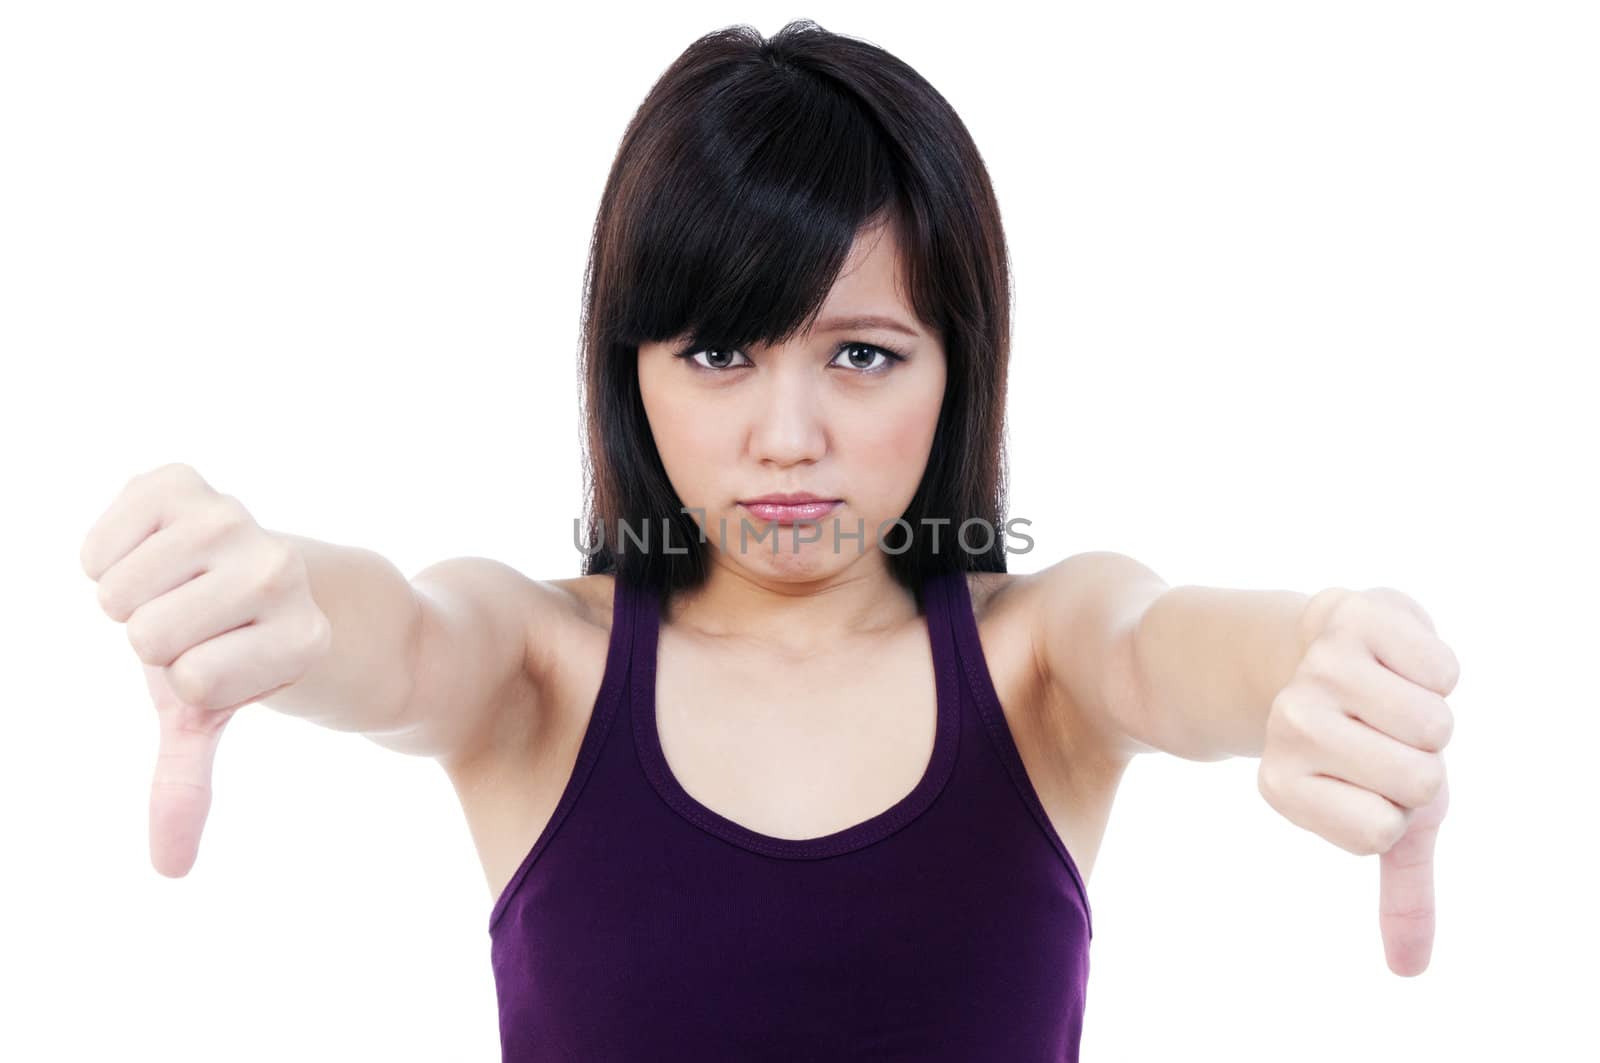 Portrait of a cute young woman showing thumbs down gesture over white background.